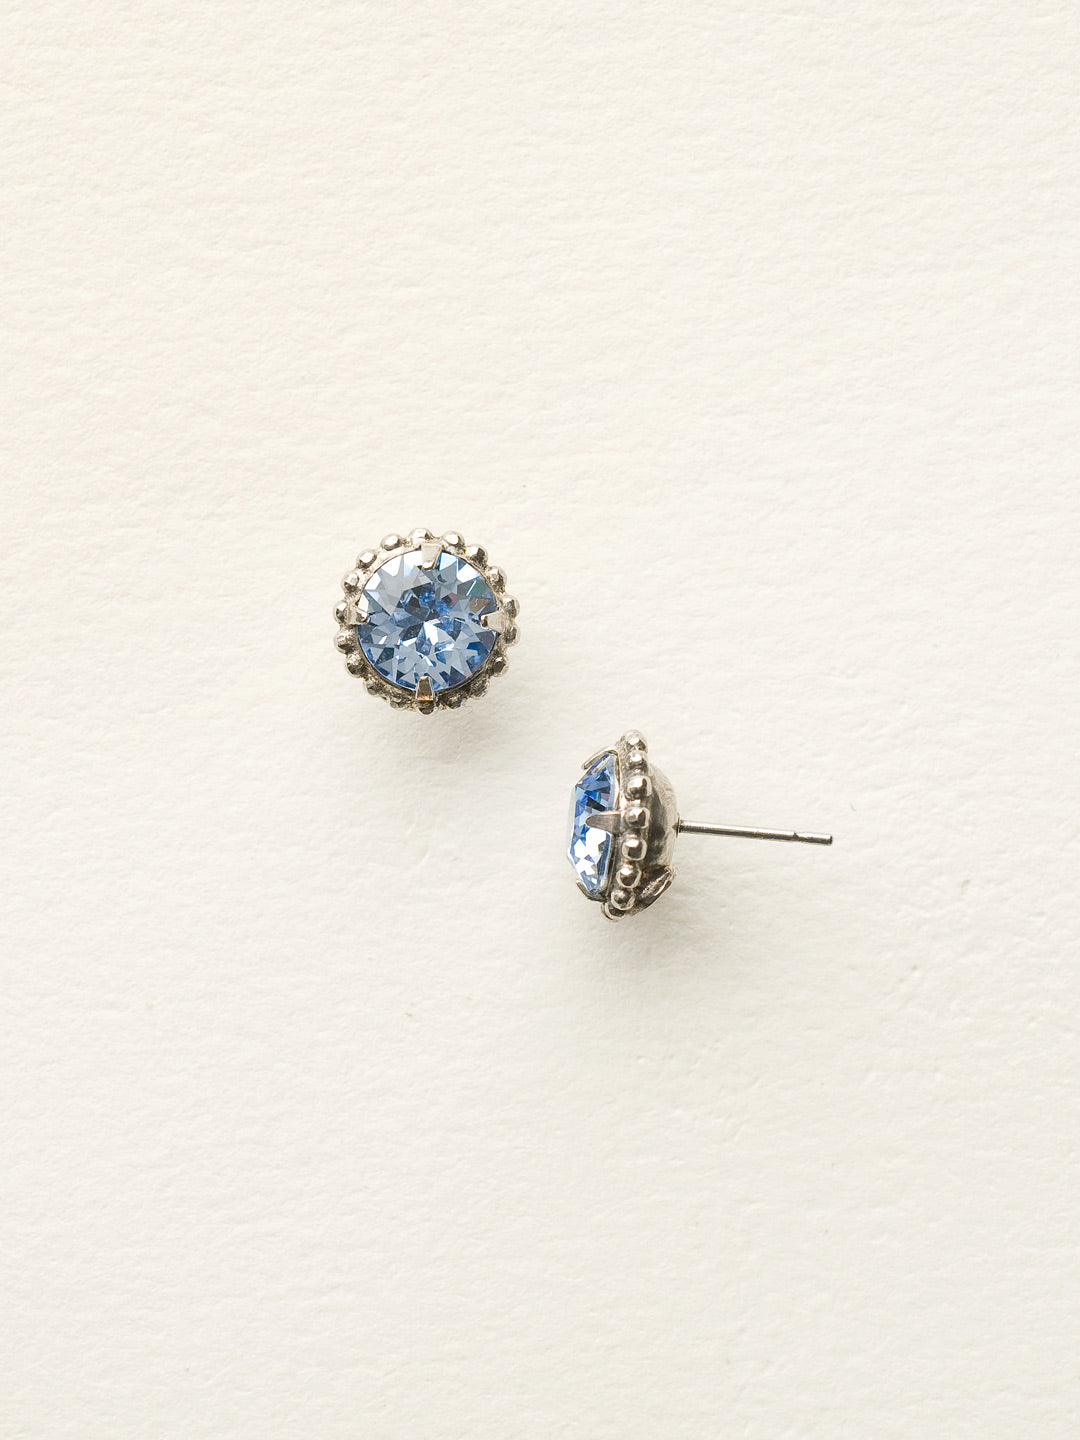 Simplicity Stud Earrings - EBY38ASLTS - <p>A timeless classic, the Simplicity Stud Earrings feature round cut crystals in a variety of colors; accented with a halo of metal beaded detail. Need help picking a stud? <a href="https://www.sorrelli.com/blogs/sisterhood/round-stud-earrings-101-a-rundown-of-sizes-styles-and-sparkle">Check out our size guide!</a> From Sorrelli's Light Sapphire collection in our Antique Silver-tone finish.</p>